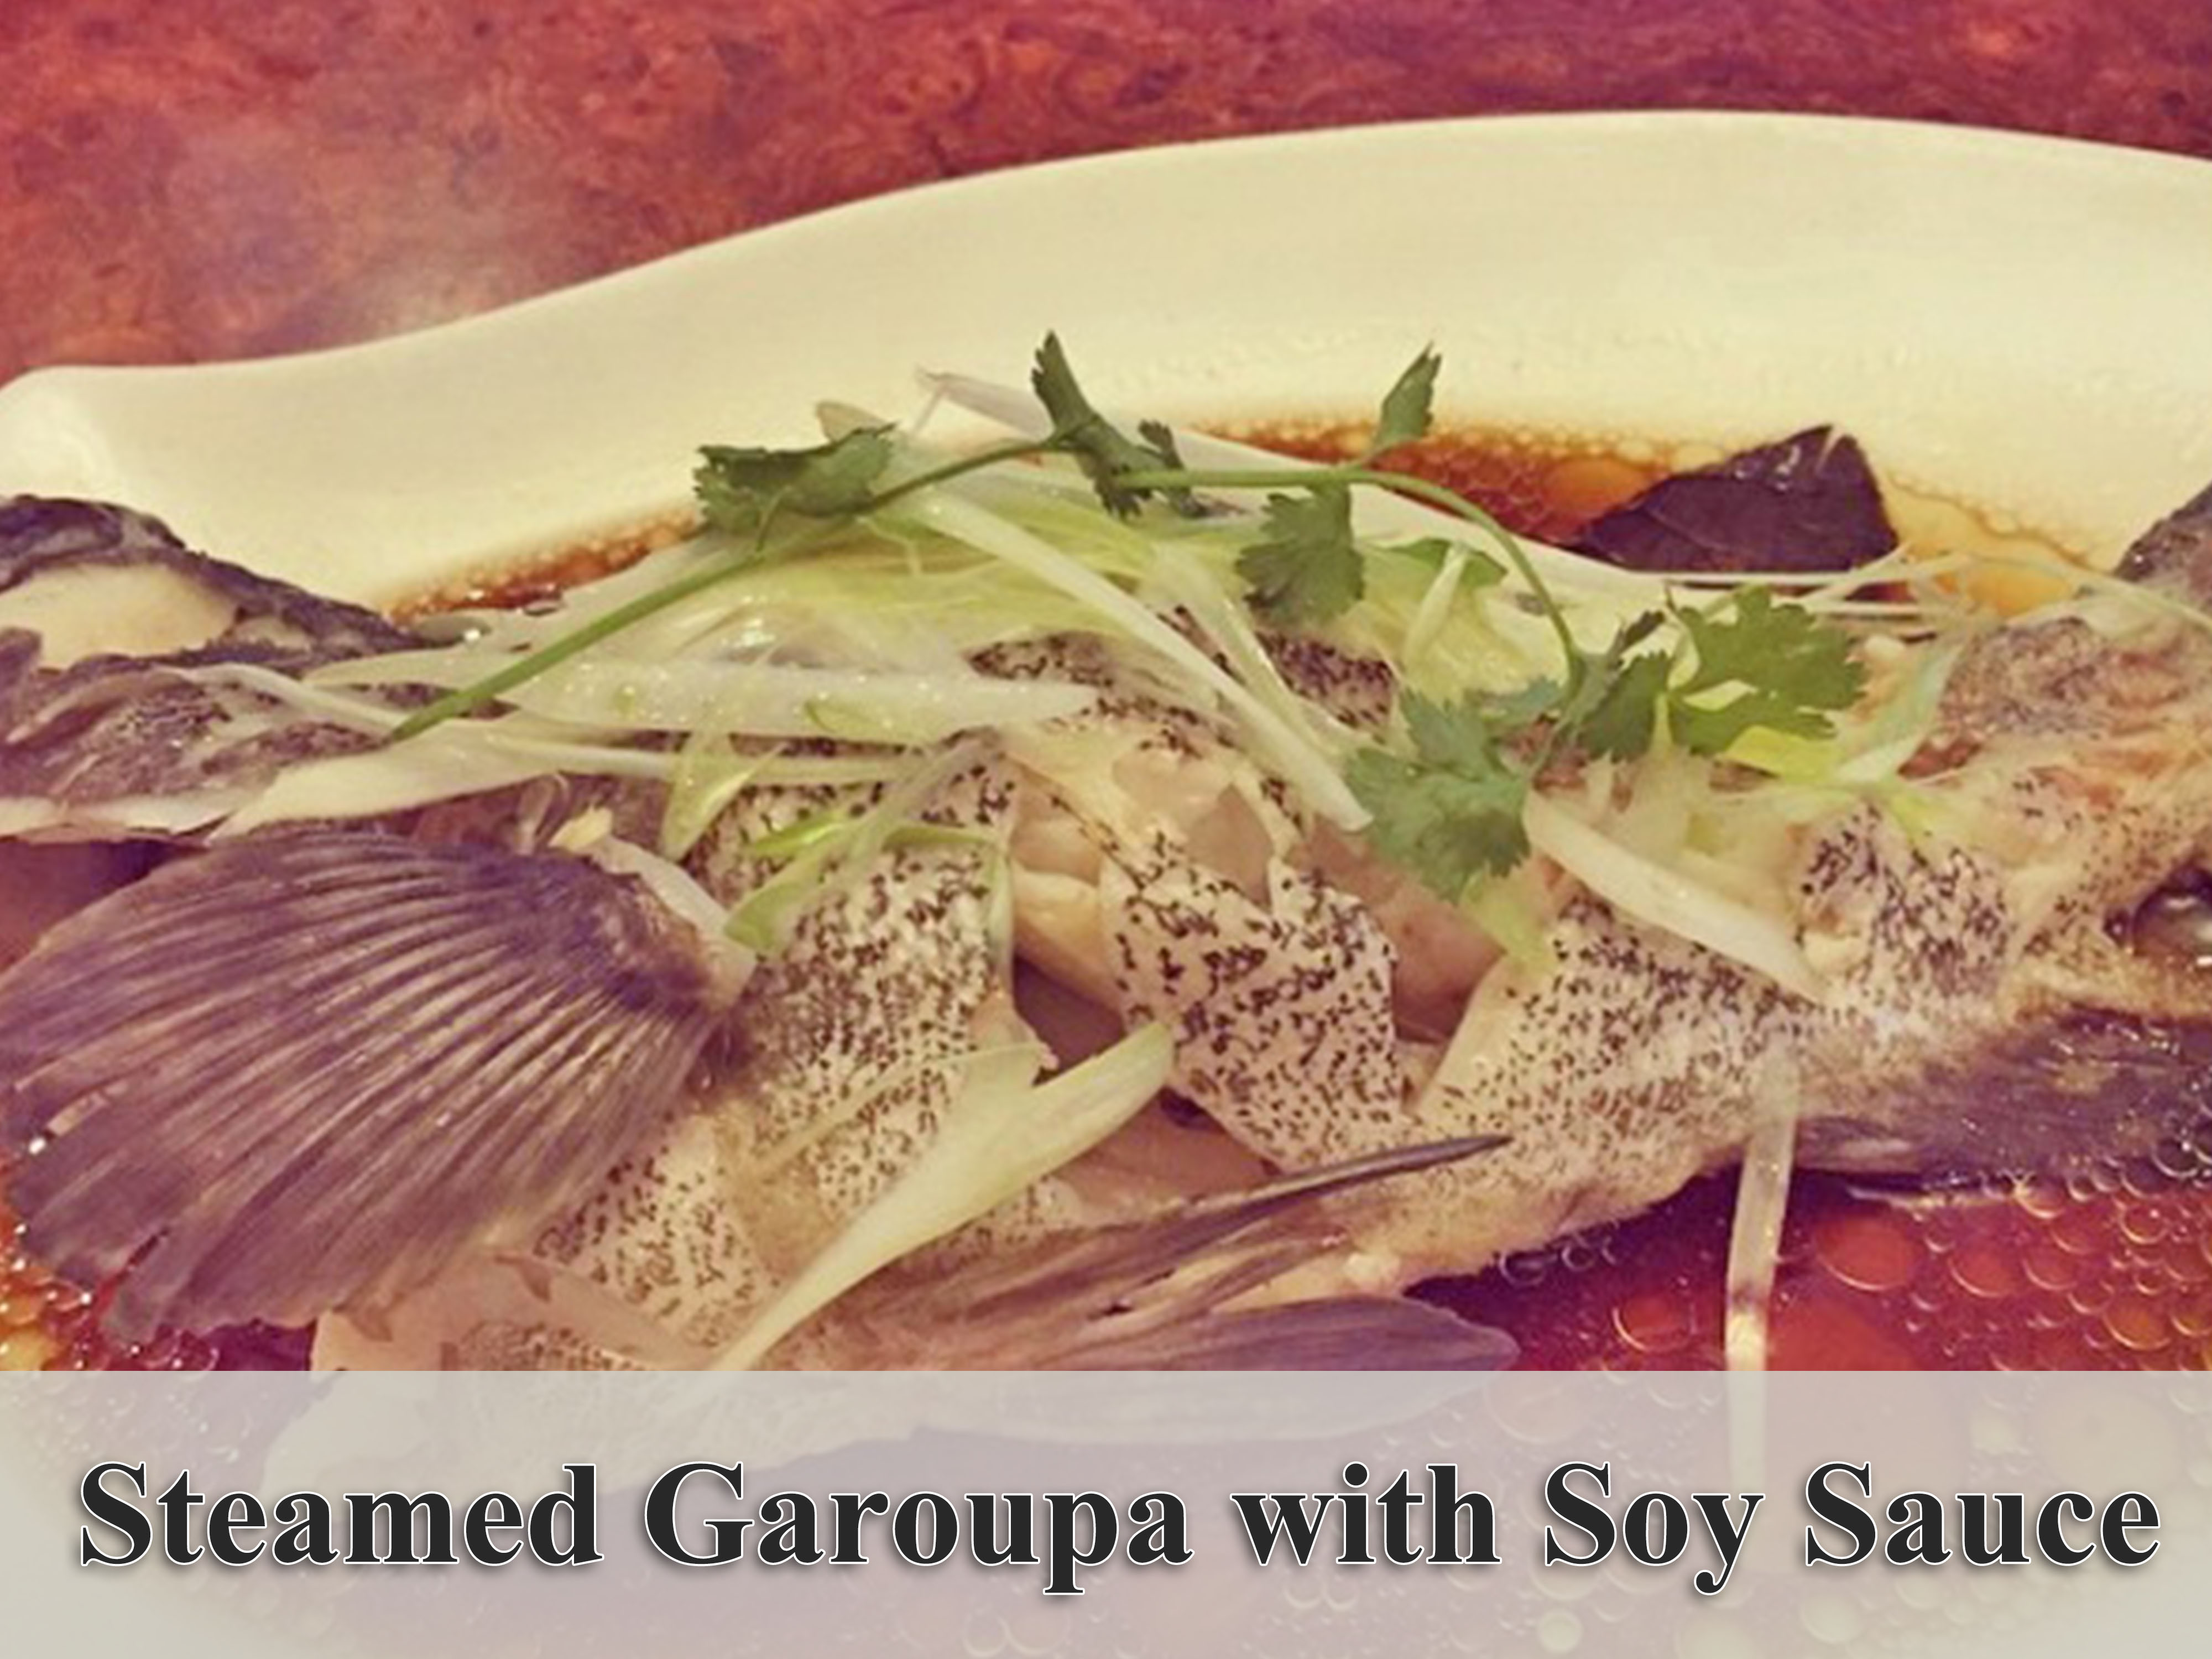 Steamed Garoupa with Soy Sauce